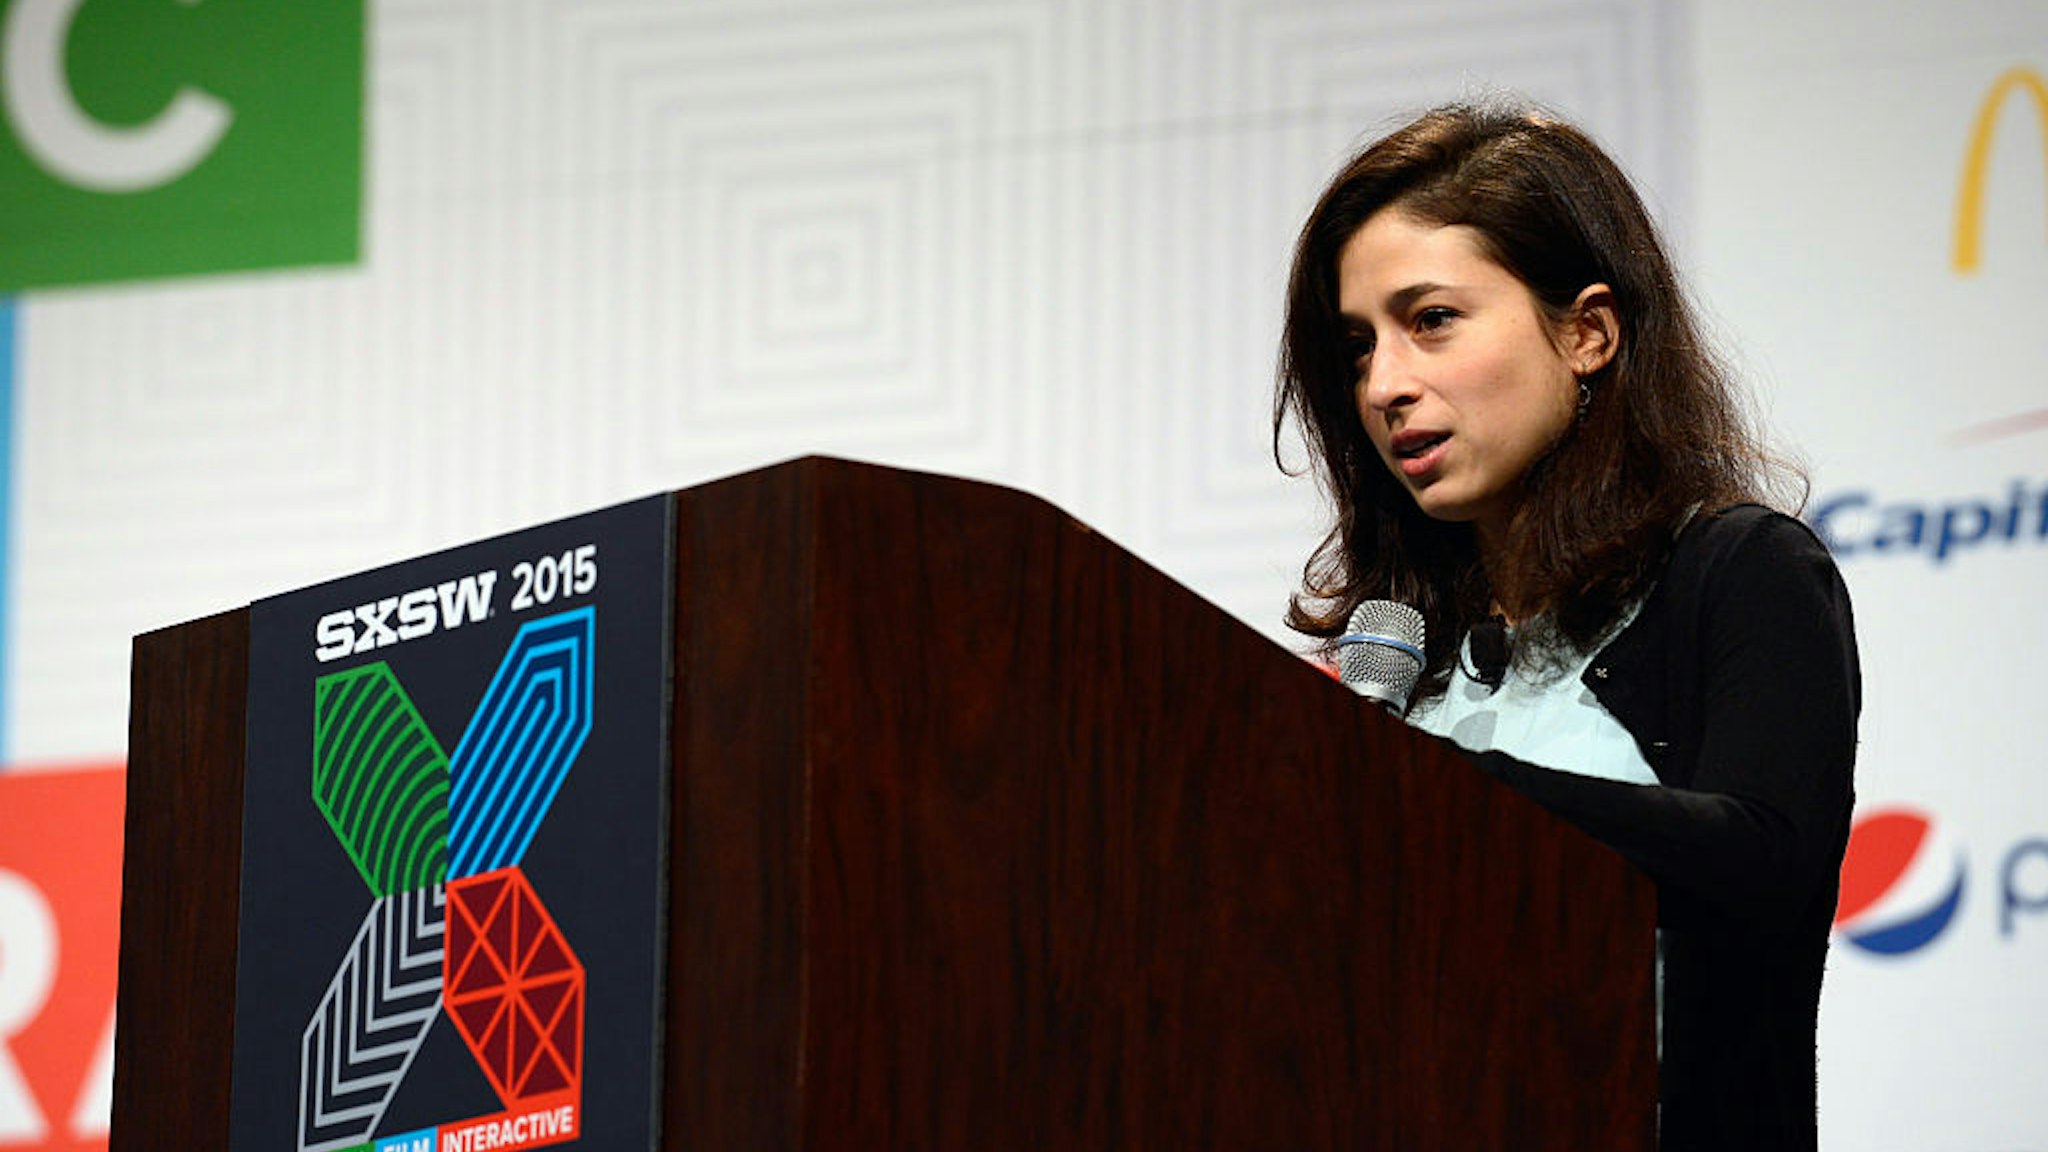 AUSTIN, TX - MARCH 14: Catherine Rampell, Opinion Columnist for The Washington Post speaks onstage at 'Pardon The Disruption: Steve Case On Entrepreneurs' during the 2015 SXSW Music, Film + Interactive Festival at the Austin Convention Center on March 14, 2015 in Austin, Texas. (Photo by Robert A Tobiansky/Getty Images for SXSW)